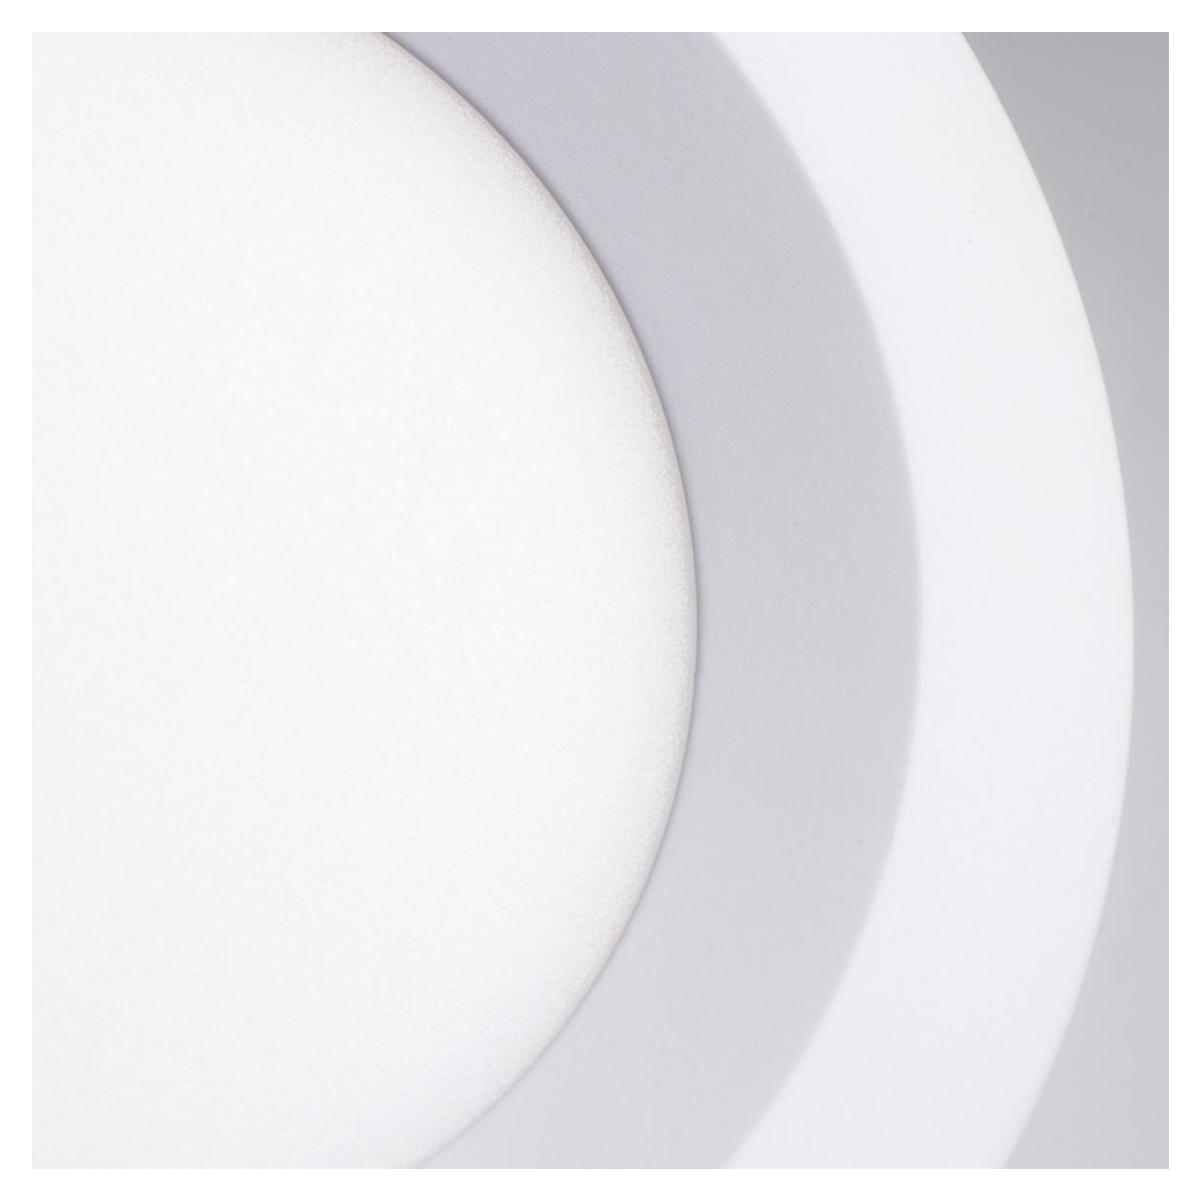 SlimFit Canless LED Recessed Light, 4 Inch, Round, 12 Watt, 850 Lumens, Selectable CCT, 2700K to 5000K, Ultra Thin